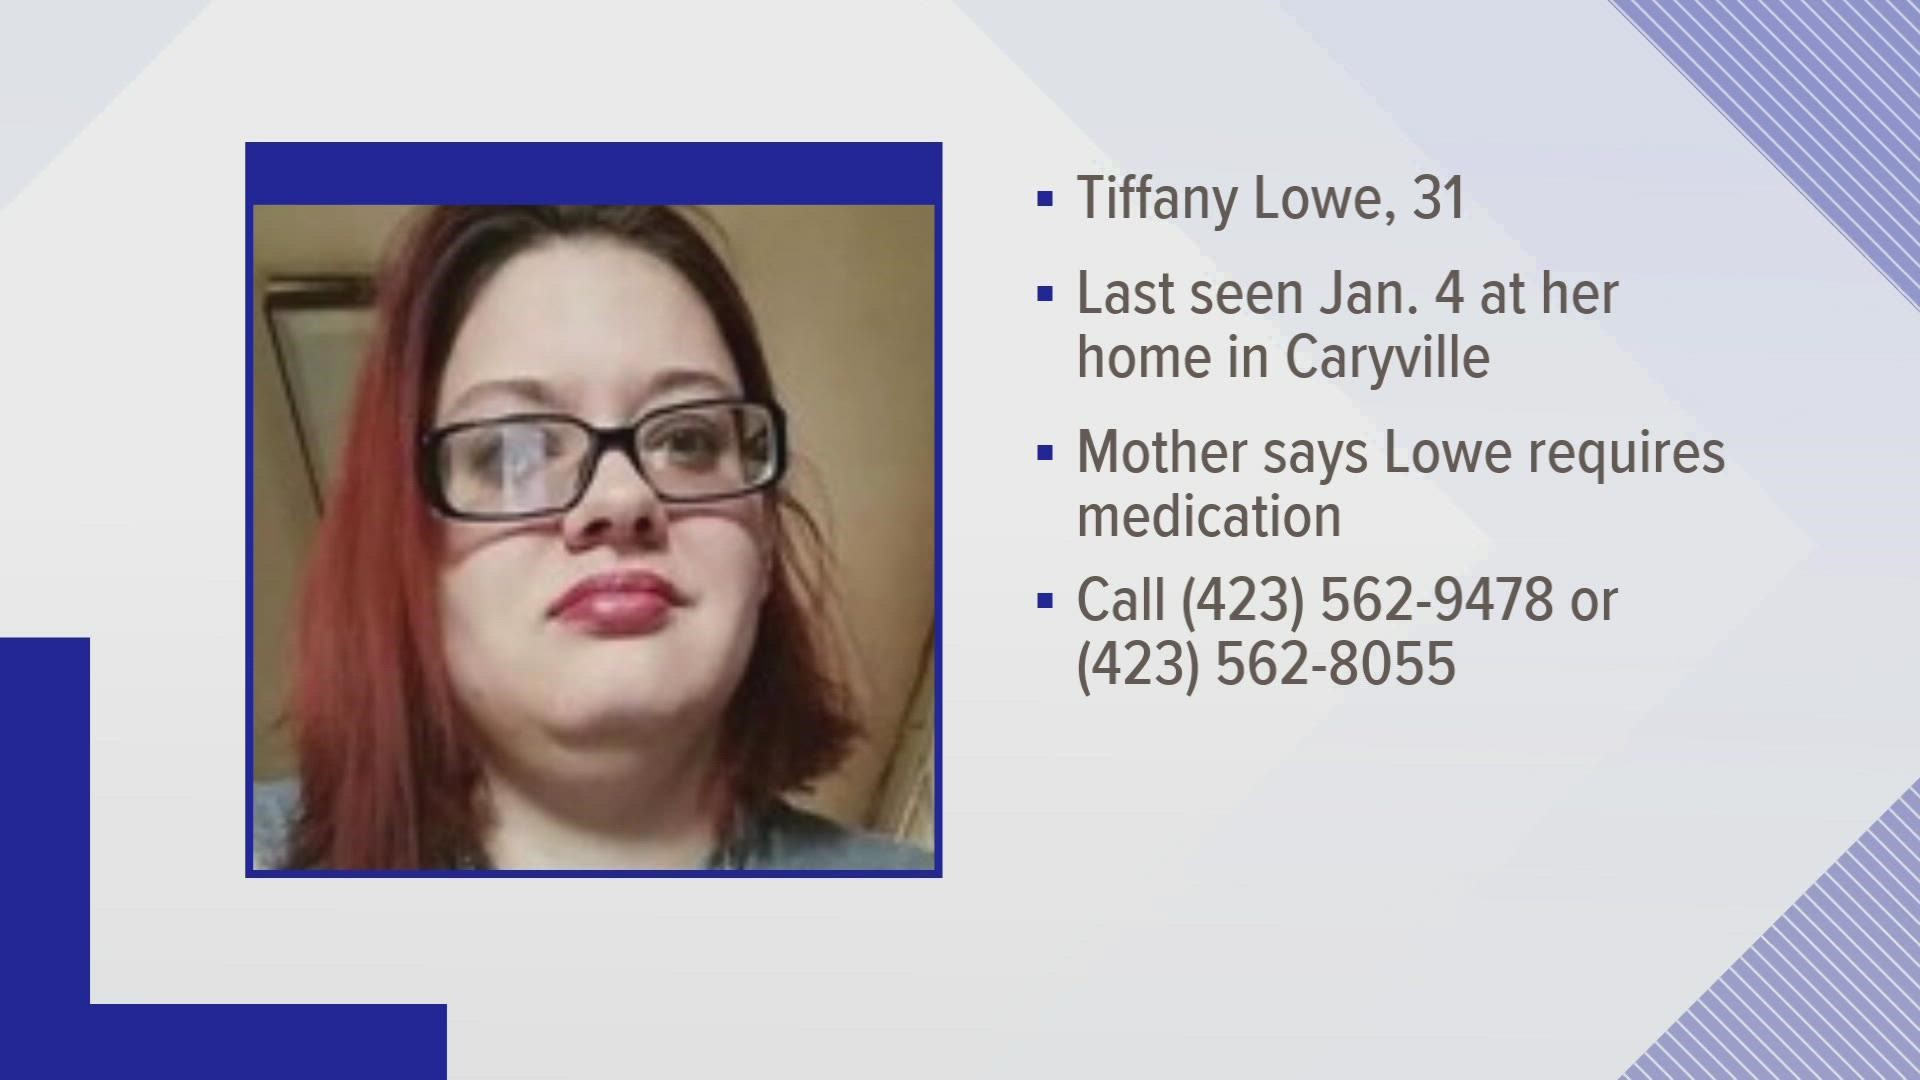 Tiffany Lowe was last seen at her home in Caryville on Wednesday, Jan. 4, according to police.